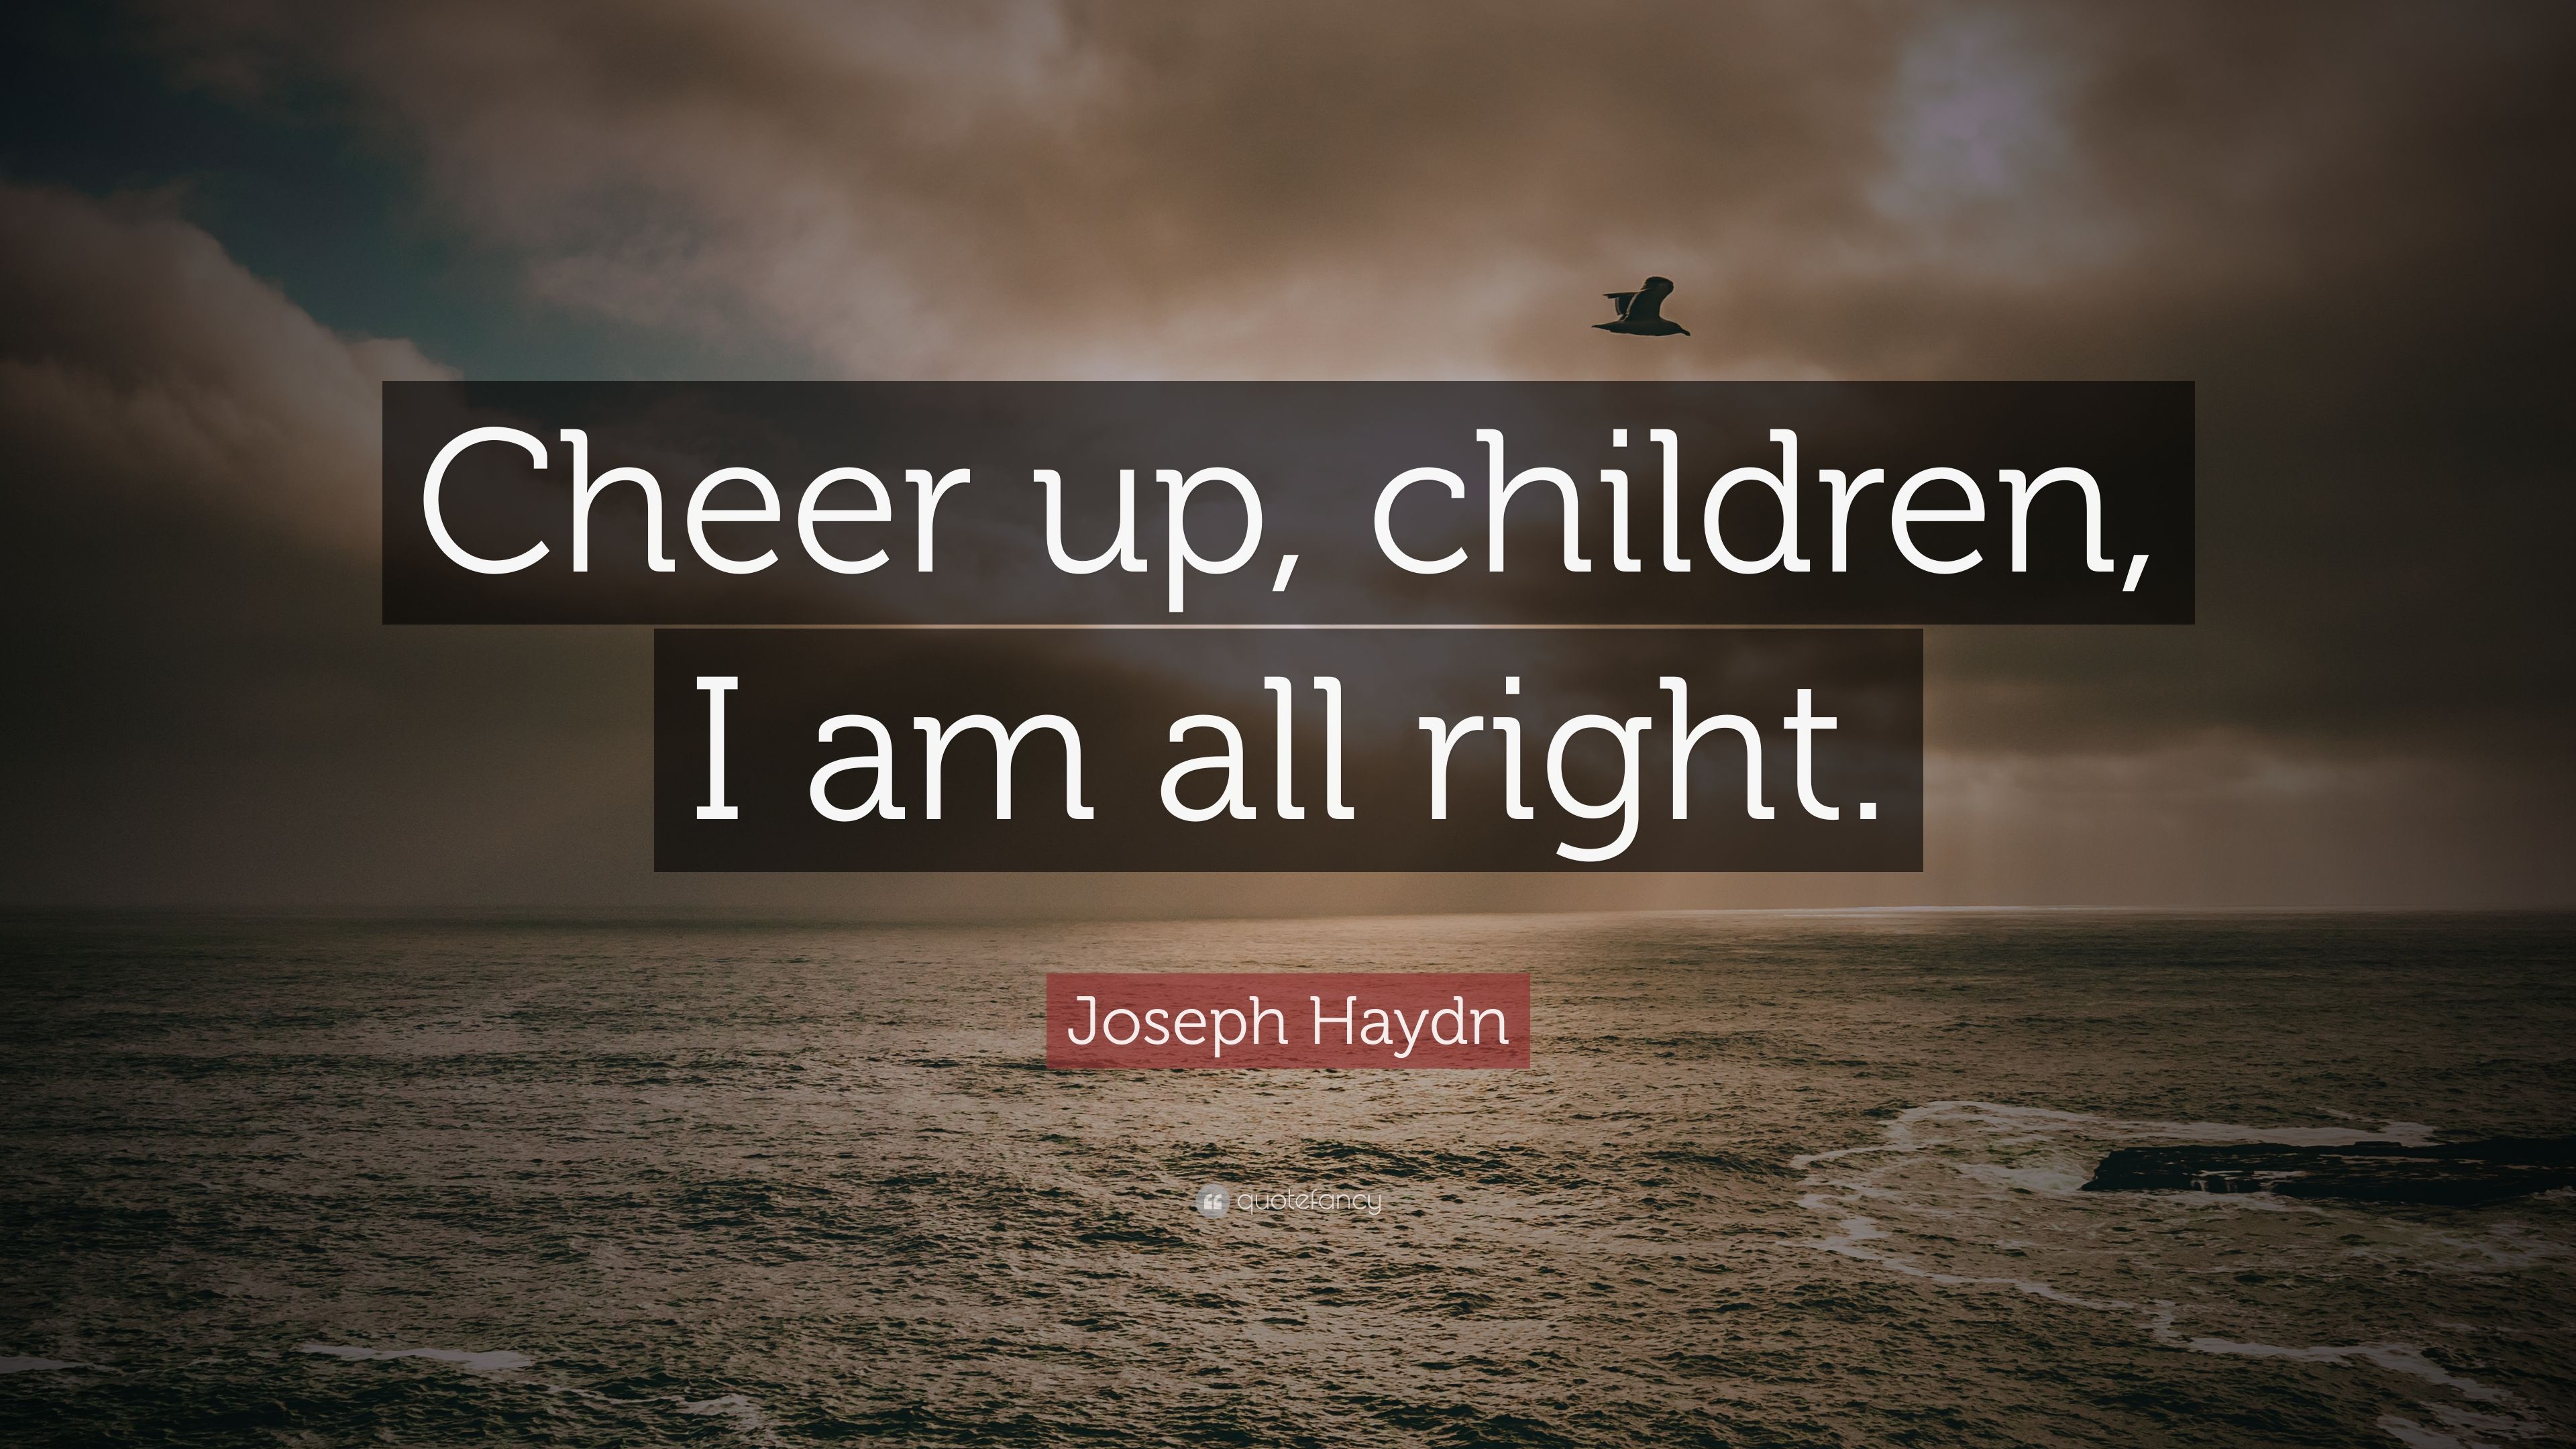 Joseph Haydn Quote: “Cheer up, children, I am all right.” 7